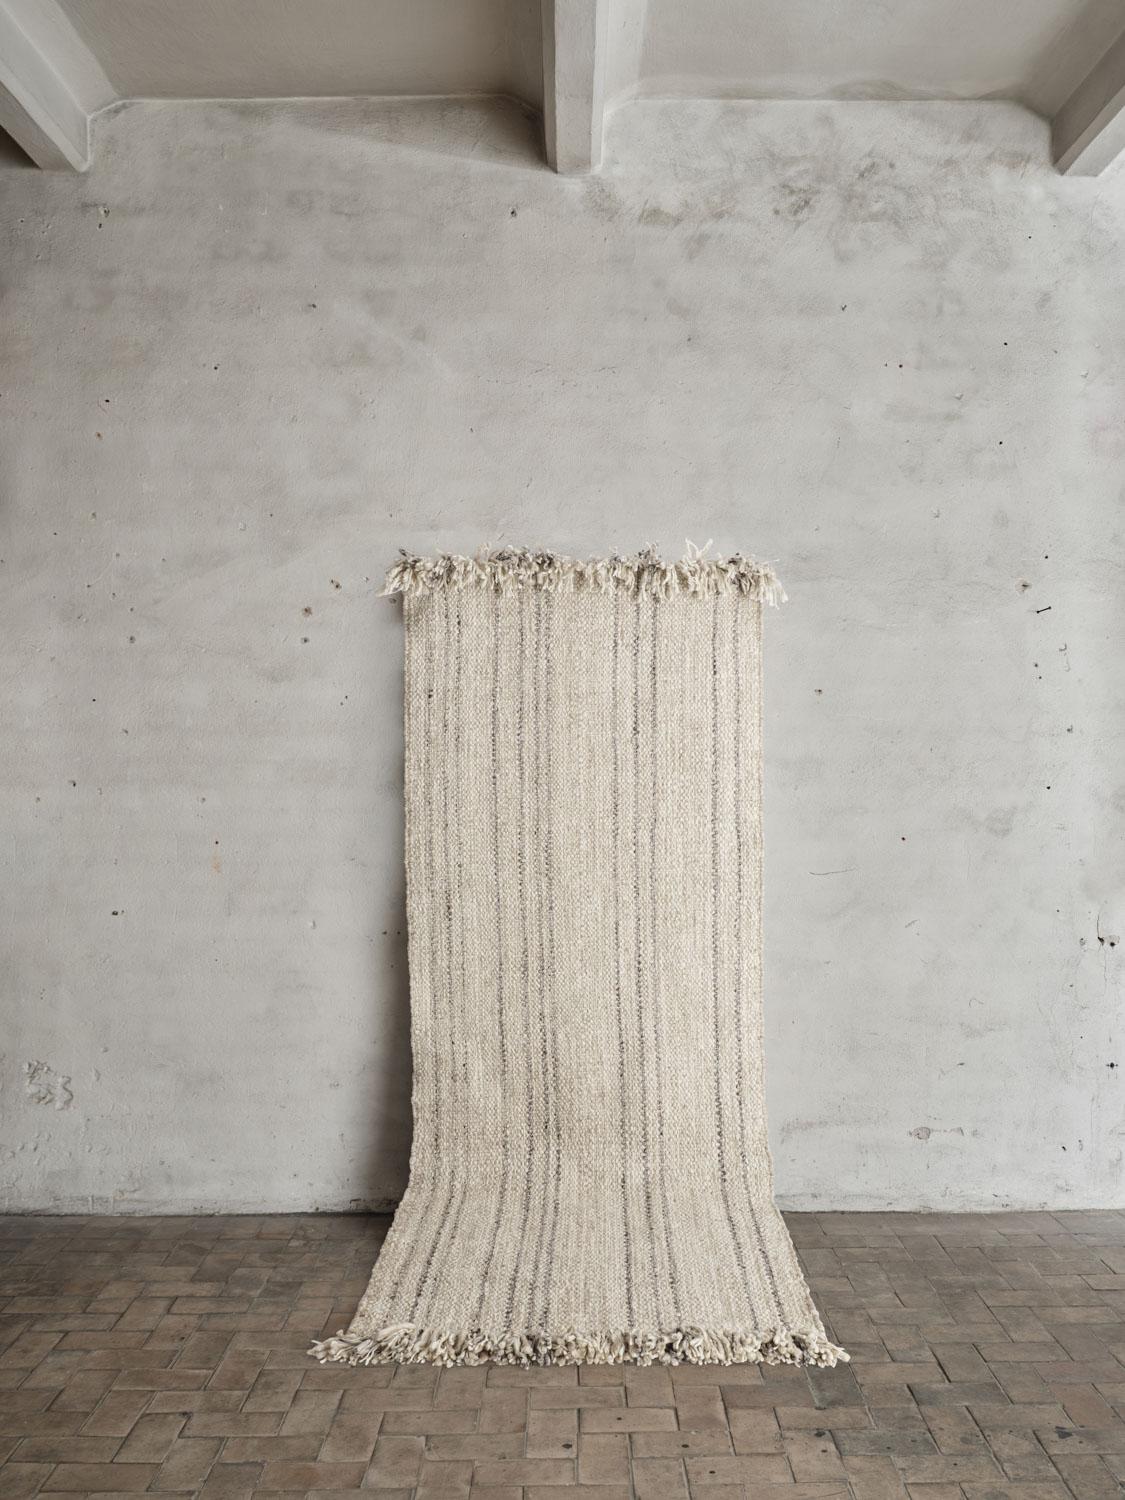 Colonnade no.06 Rug by Cappelen Dimyr
Dimensions: D 100 x H 240 cm
Materials: 100% Wool 

Colonnade no.06 is a hand-woven wool rug designed for narrow spaces. no.06 features a gentle light melange beige shade adorned with subtle darker grey-brown